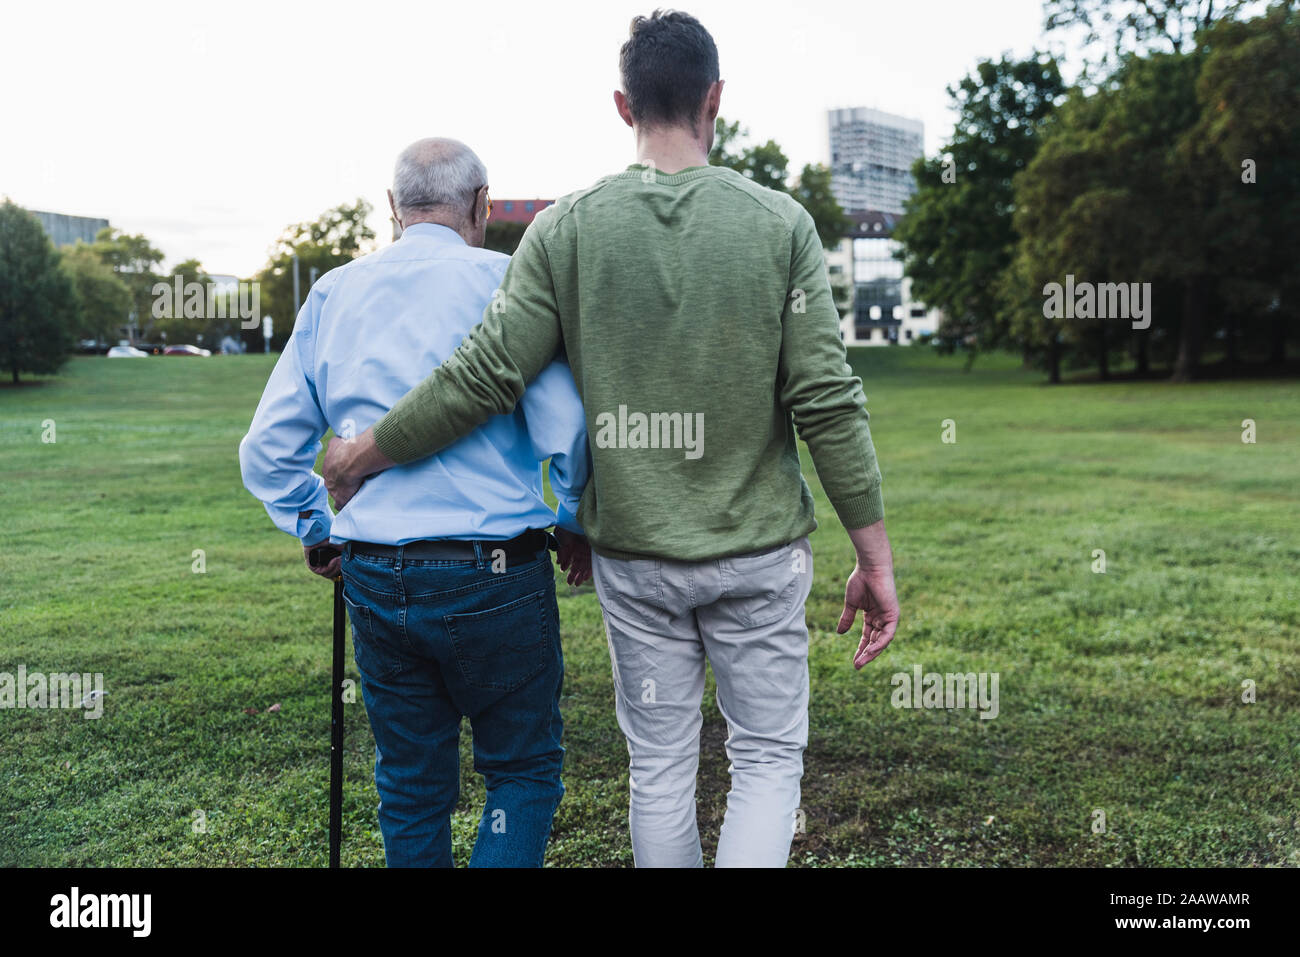 Back view of young man assisting his grandfather walking Stock Photo